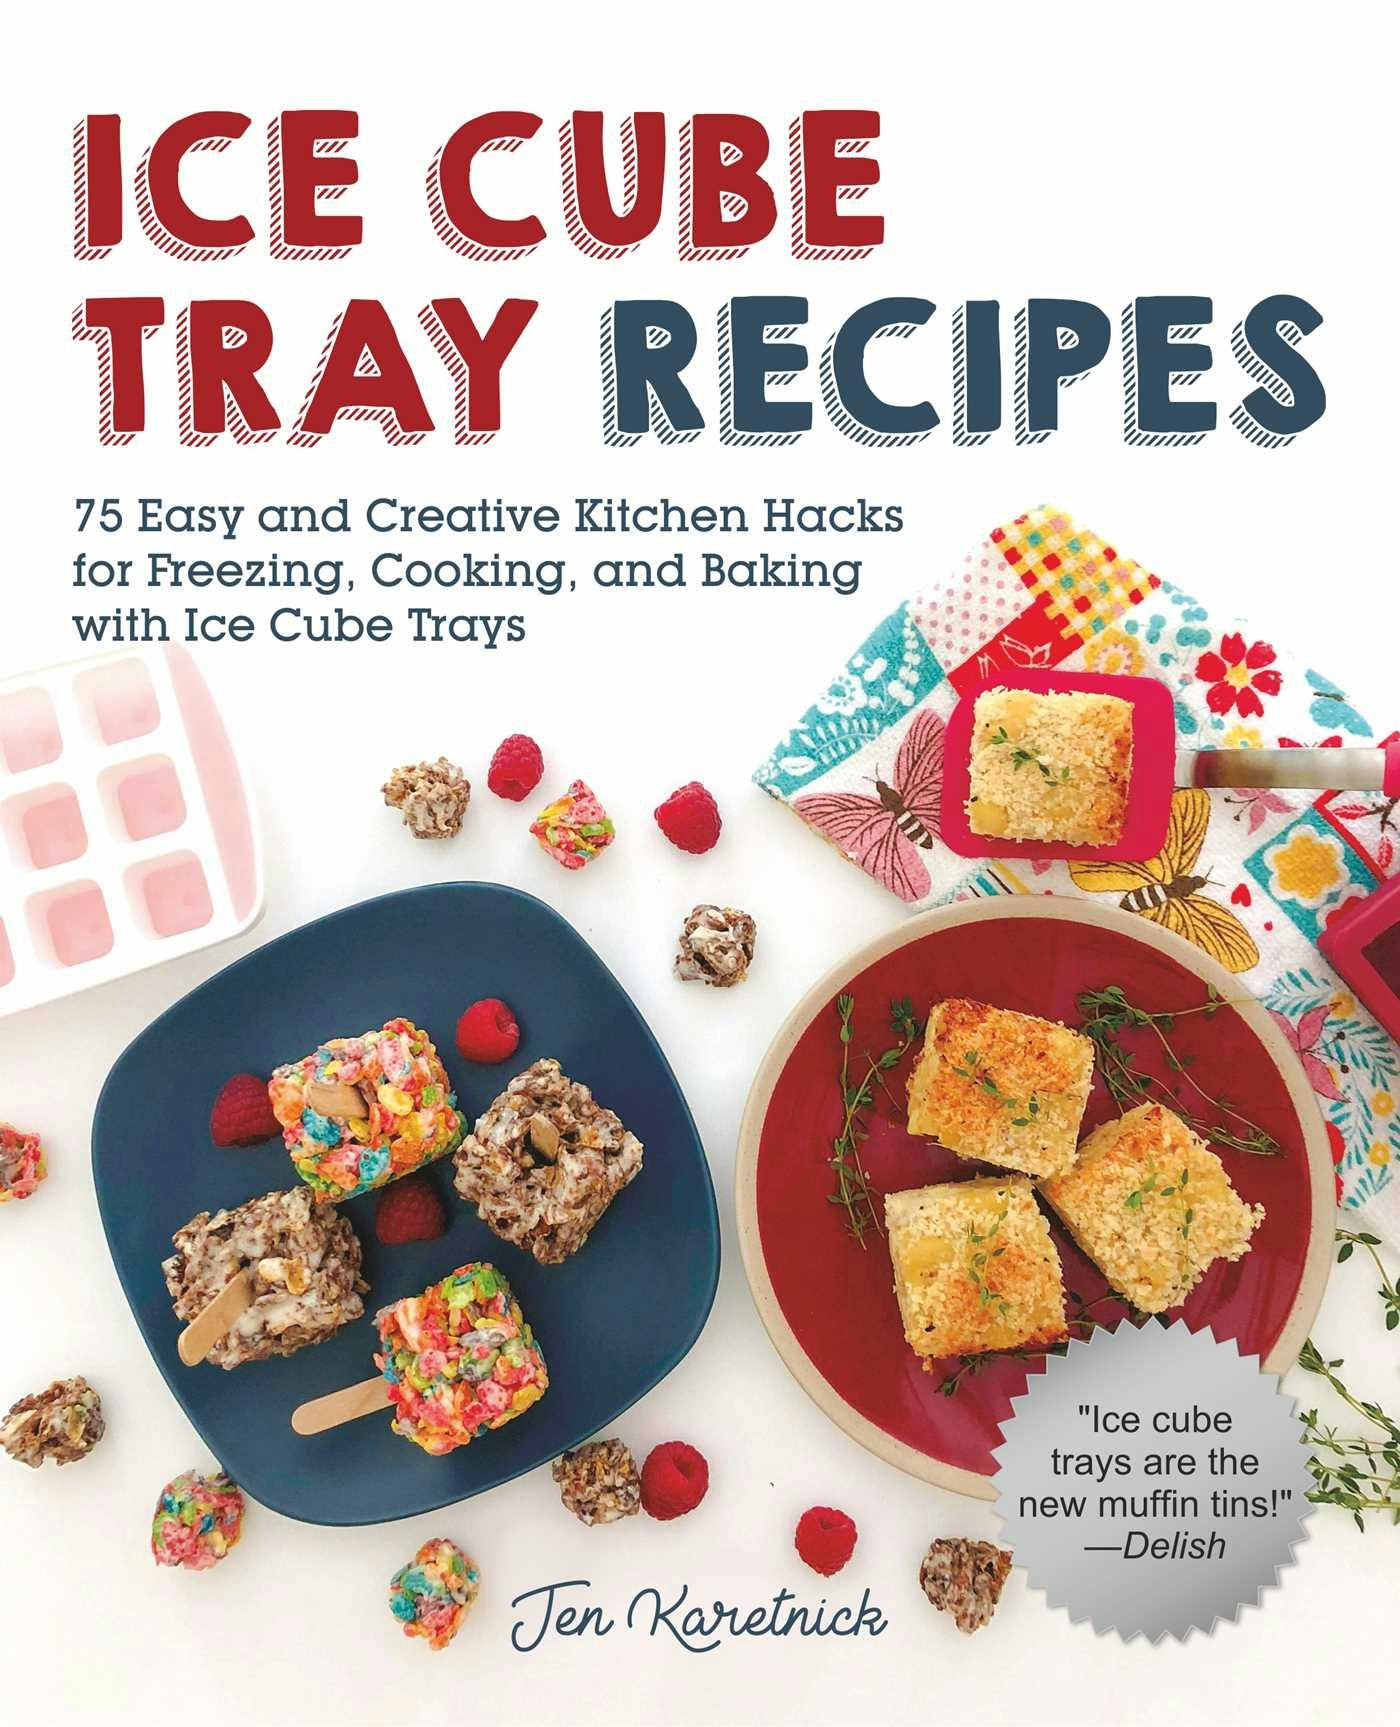 Ice Cube Tray Recipes: 75 Easy and Creative Kitchen Hacks for Freezing, Cooking, and Baking with Ice Cube Trays - Jen Karetnick